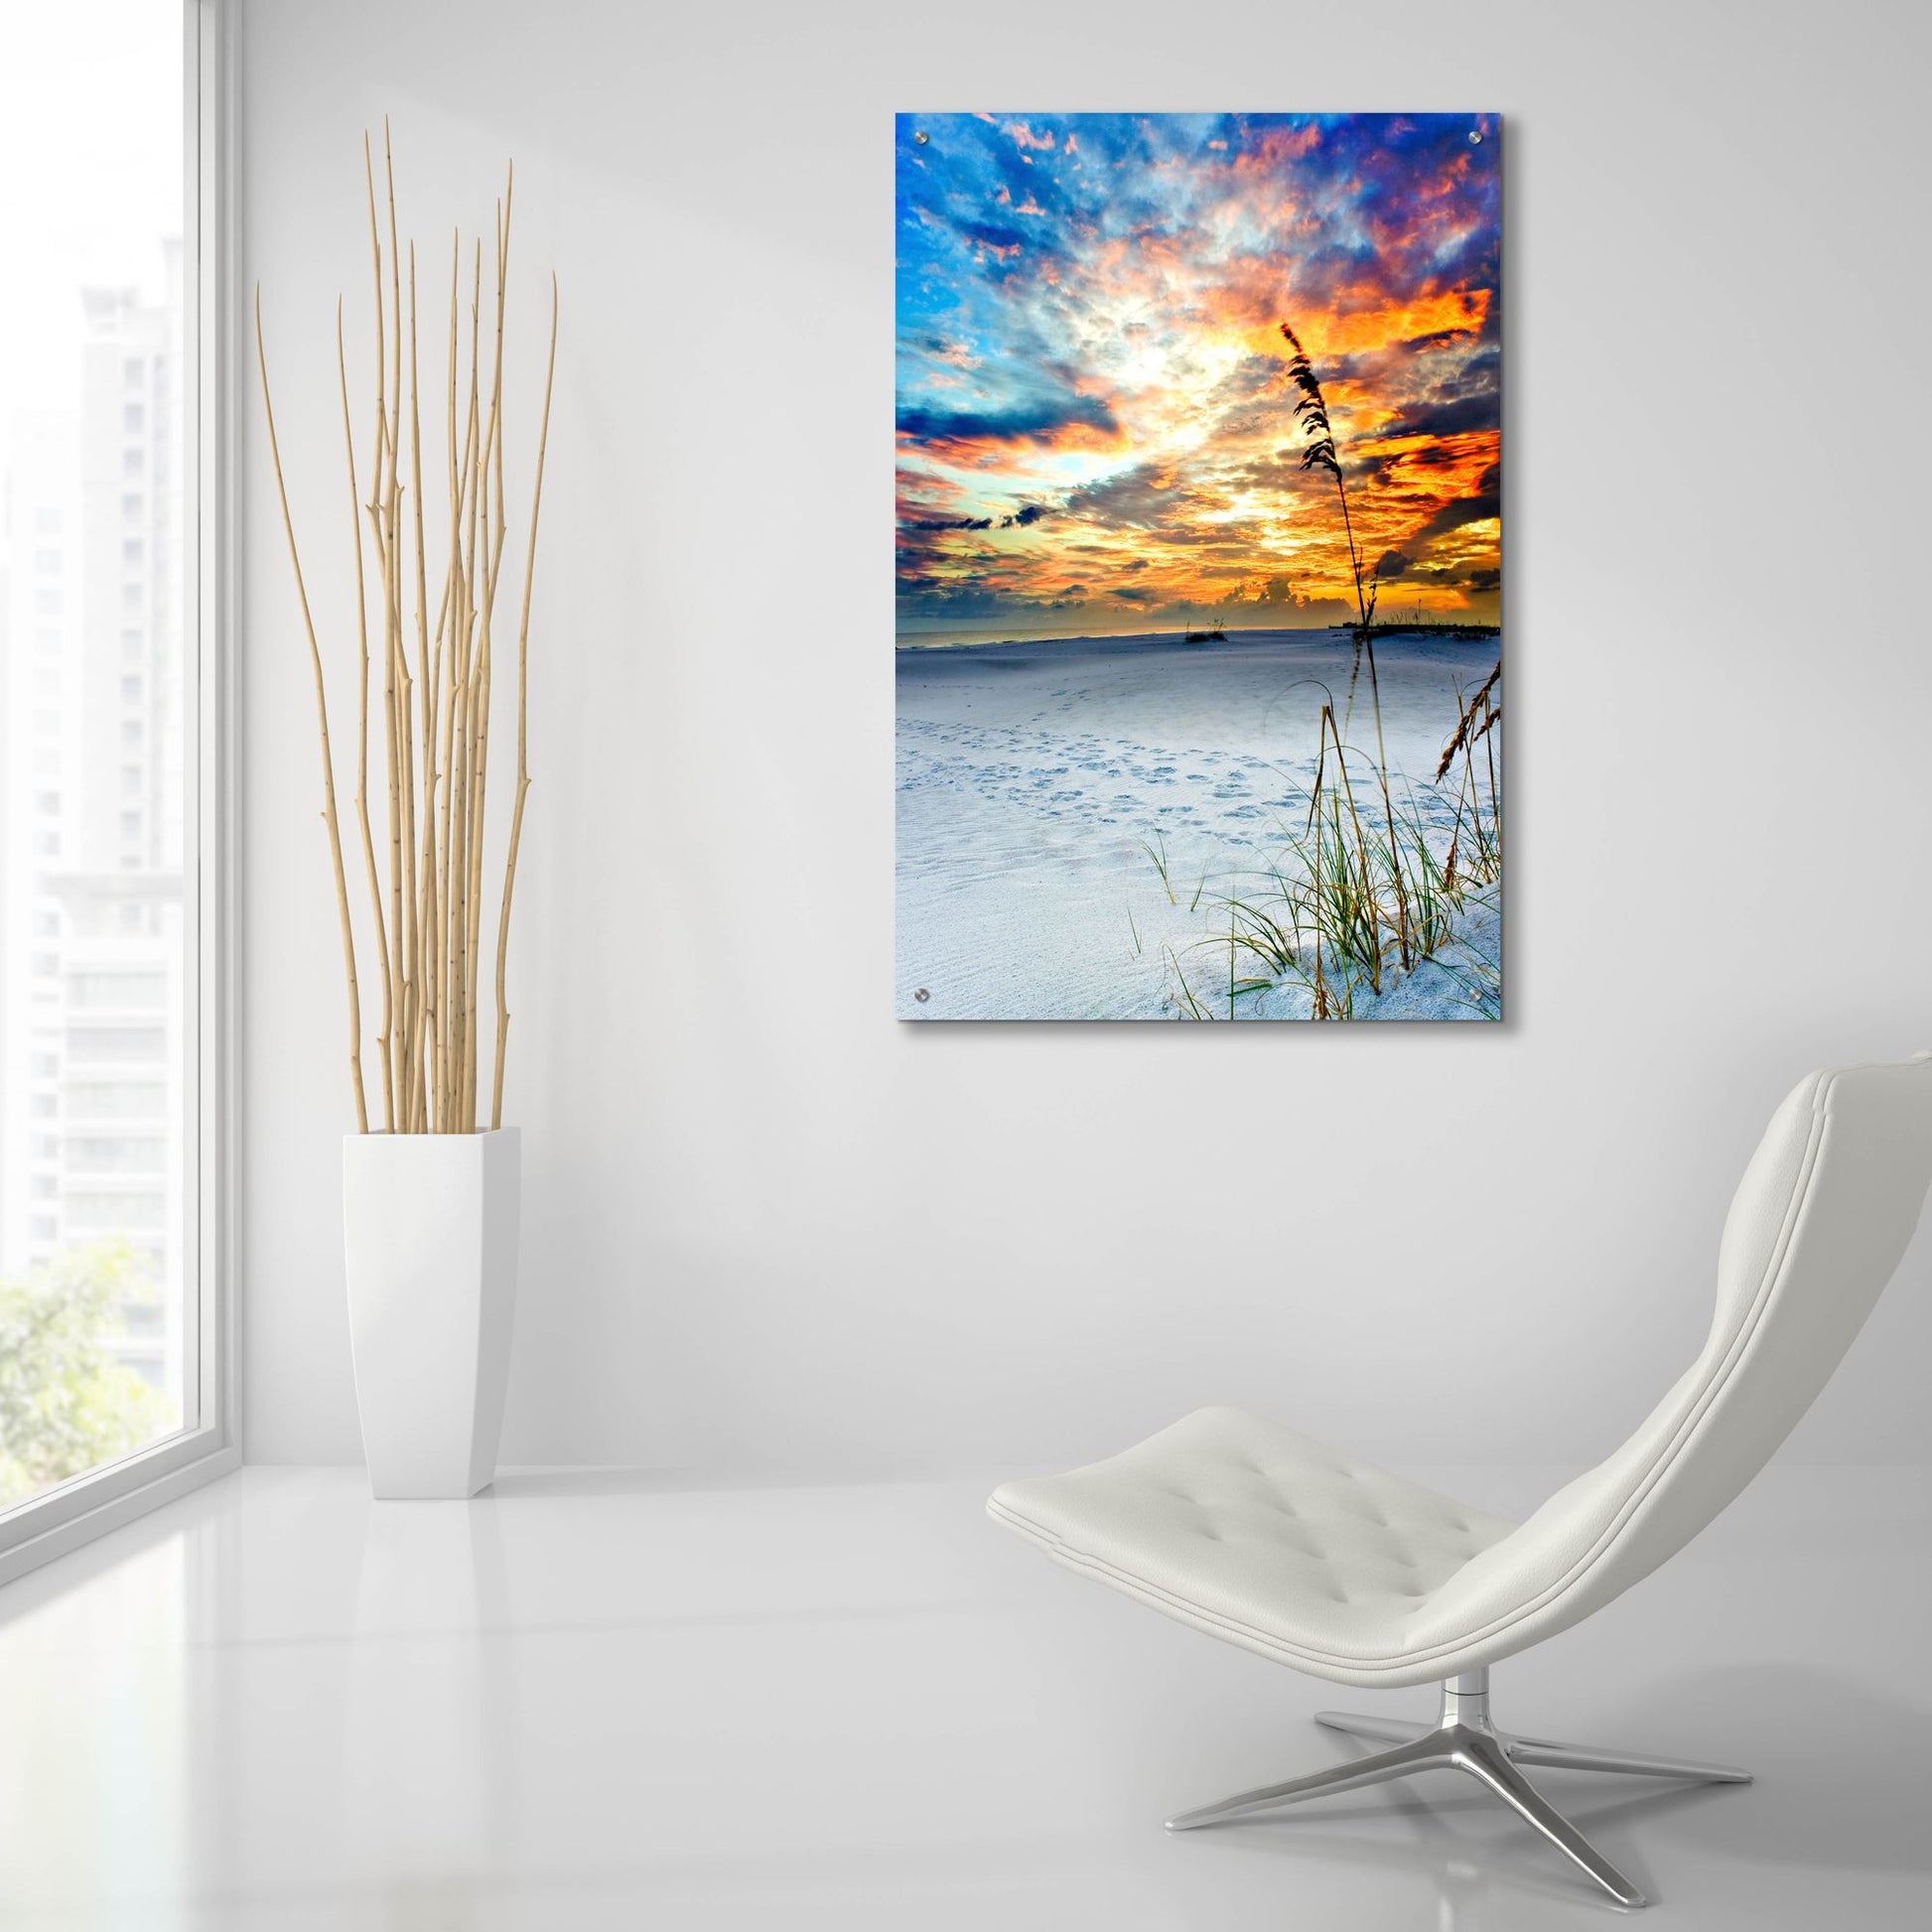 Epic Art 'Fiery Burning Red Clouds Sunset Footprints' by Ezra Tanner, Acrylic Glass Wall Art,24x36